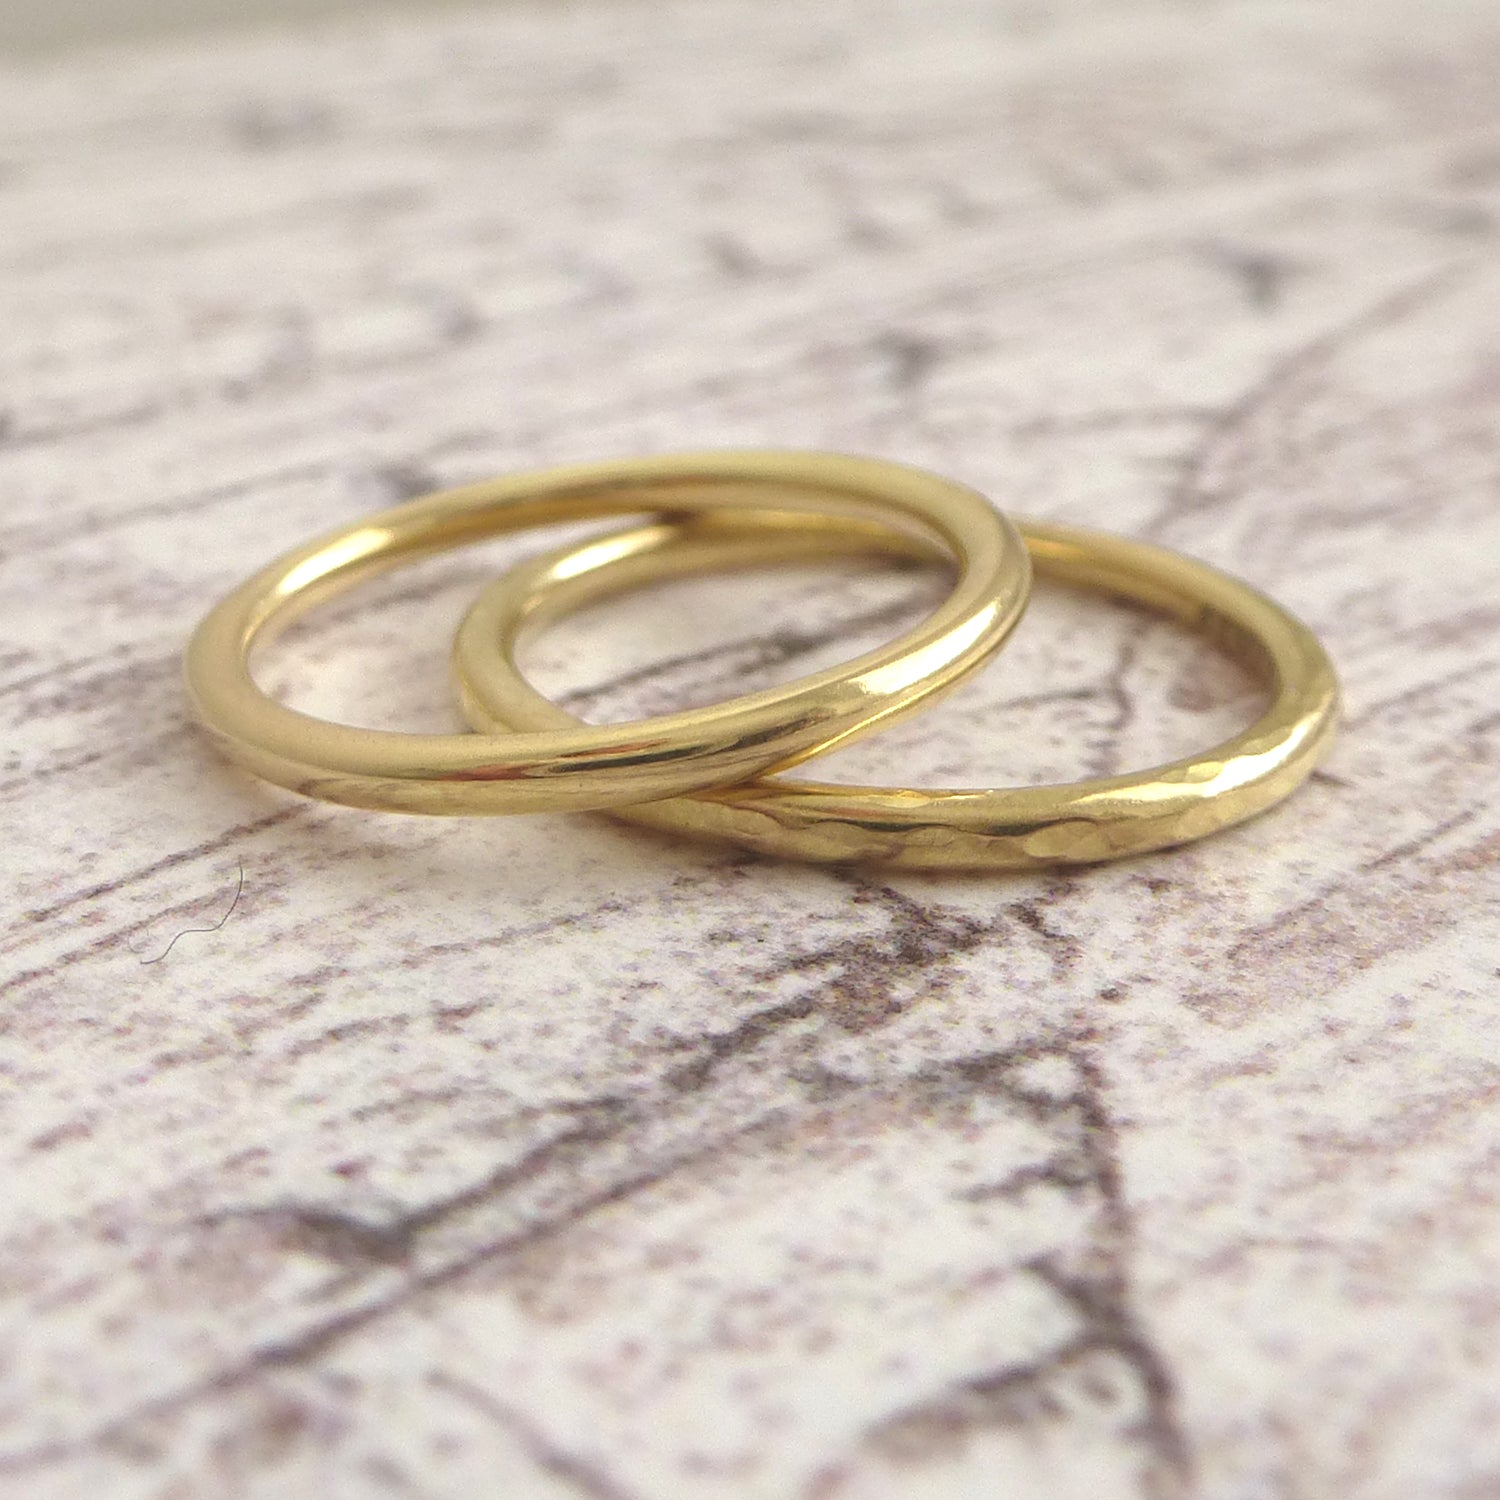 Pair of 18ct yellow gold recycled bands, 1.5mm diameter, one smooth one hammered, close up